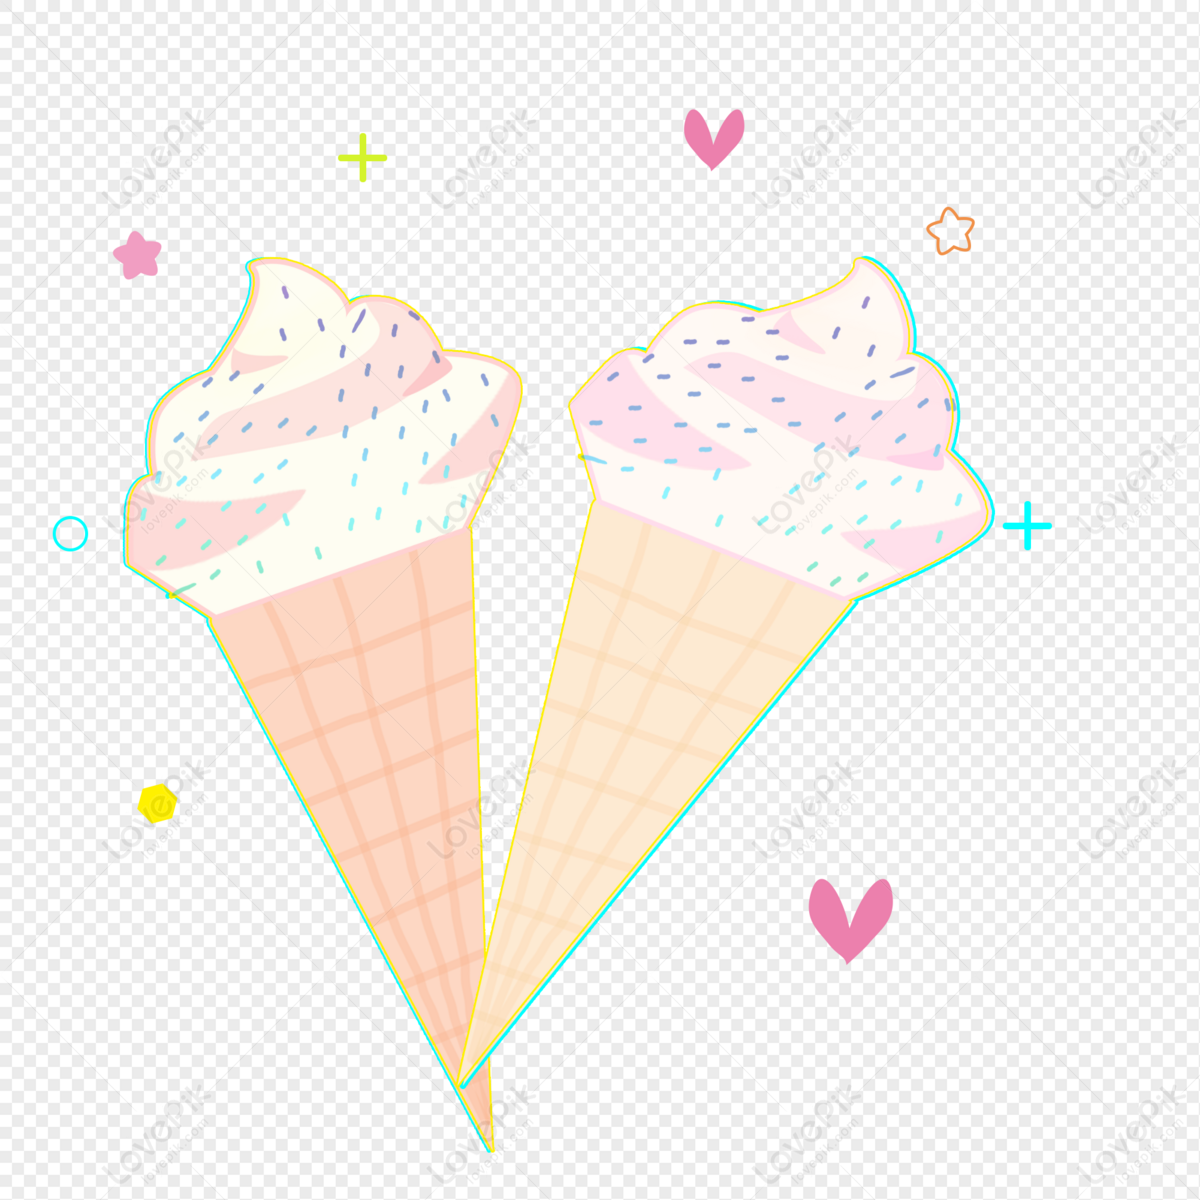 Cartoon Cone PNG Images With Transparent Background | Free ...